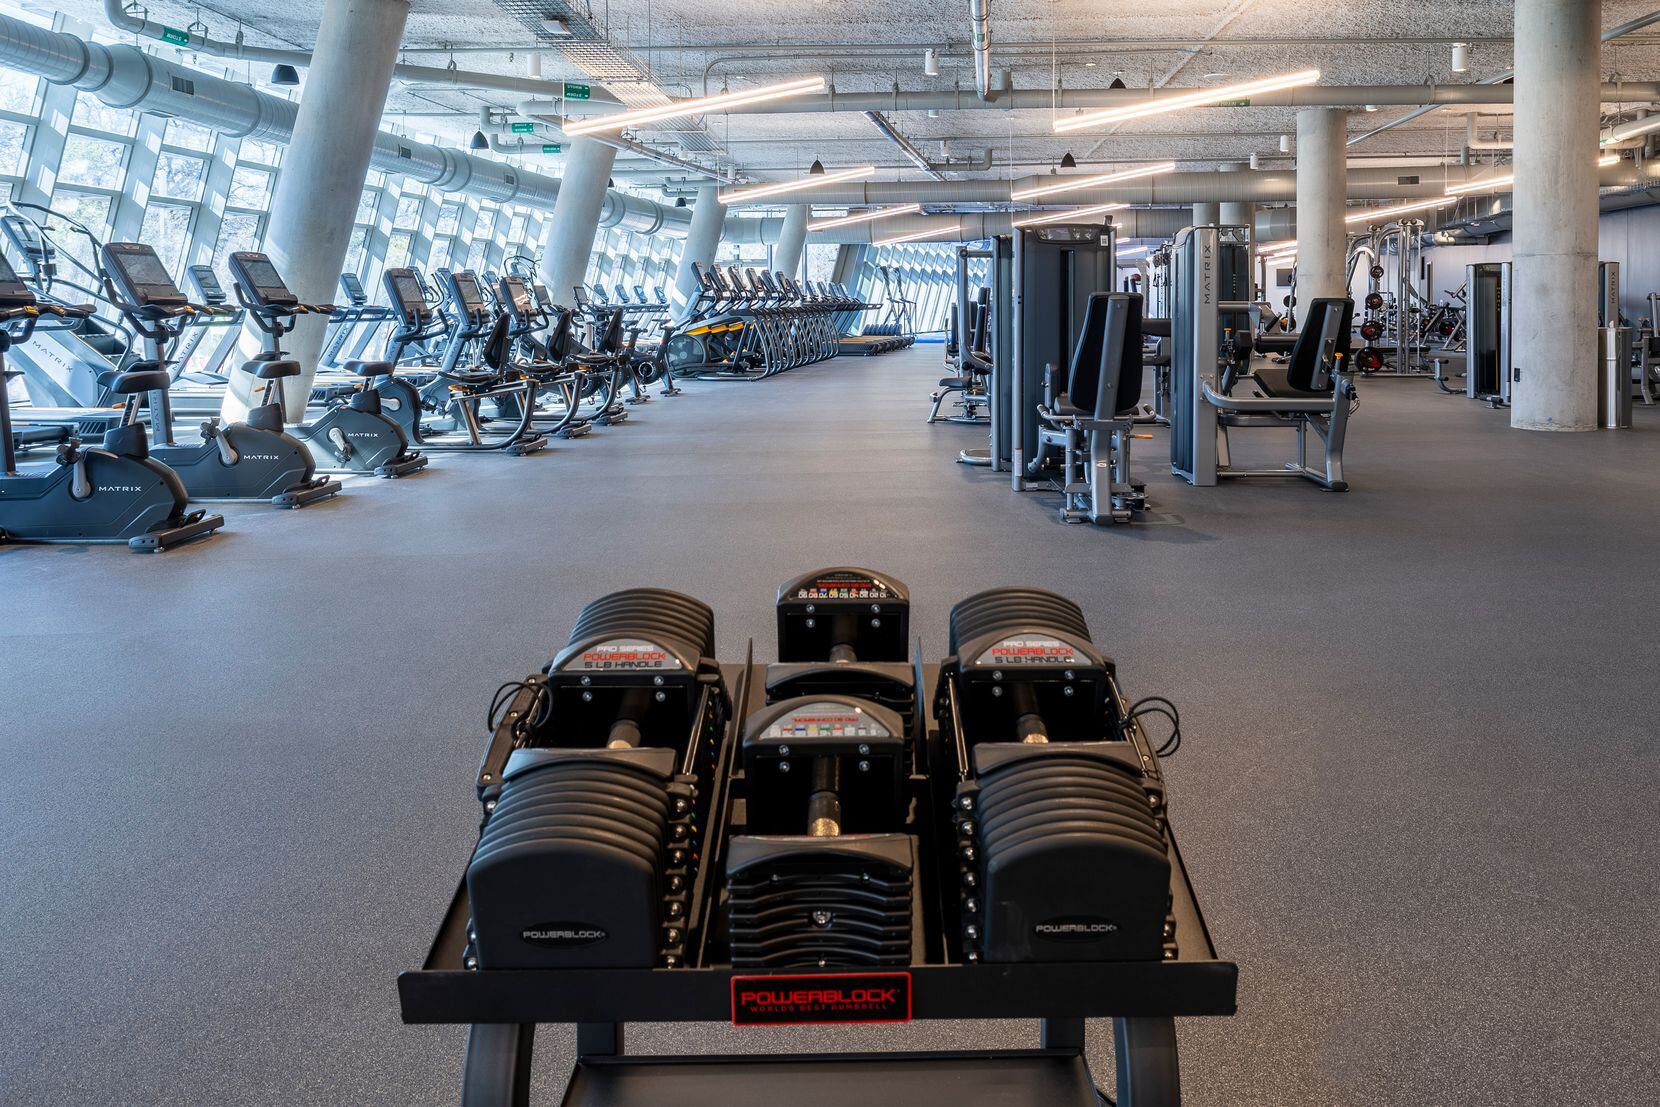 Skyview 6 includes a fitness room as part of the new complex where pilots, flight attendants...